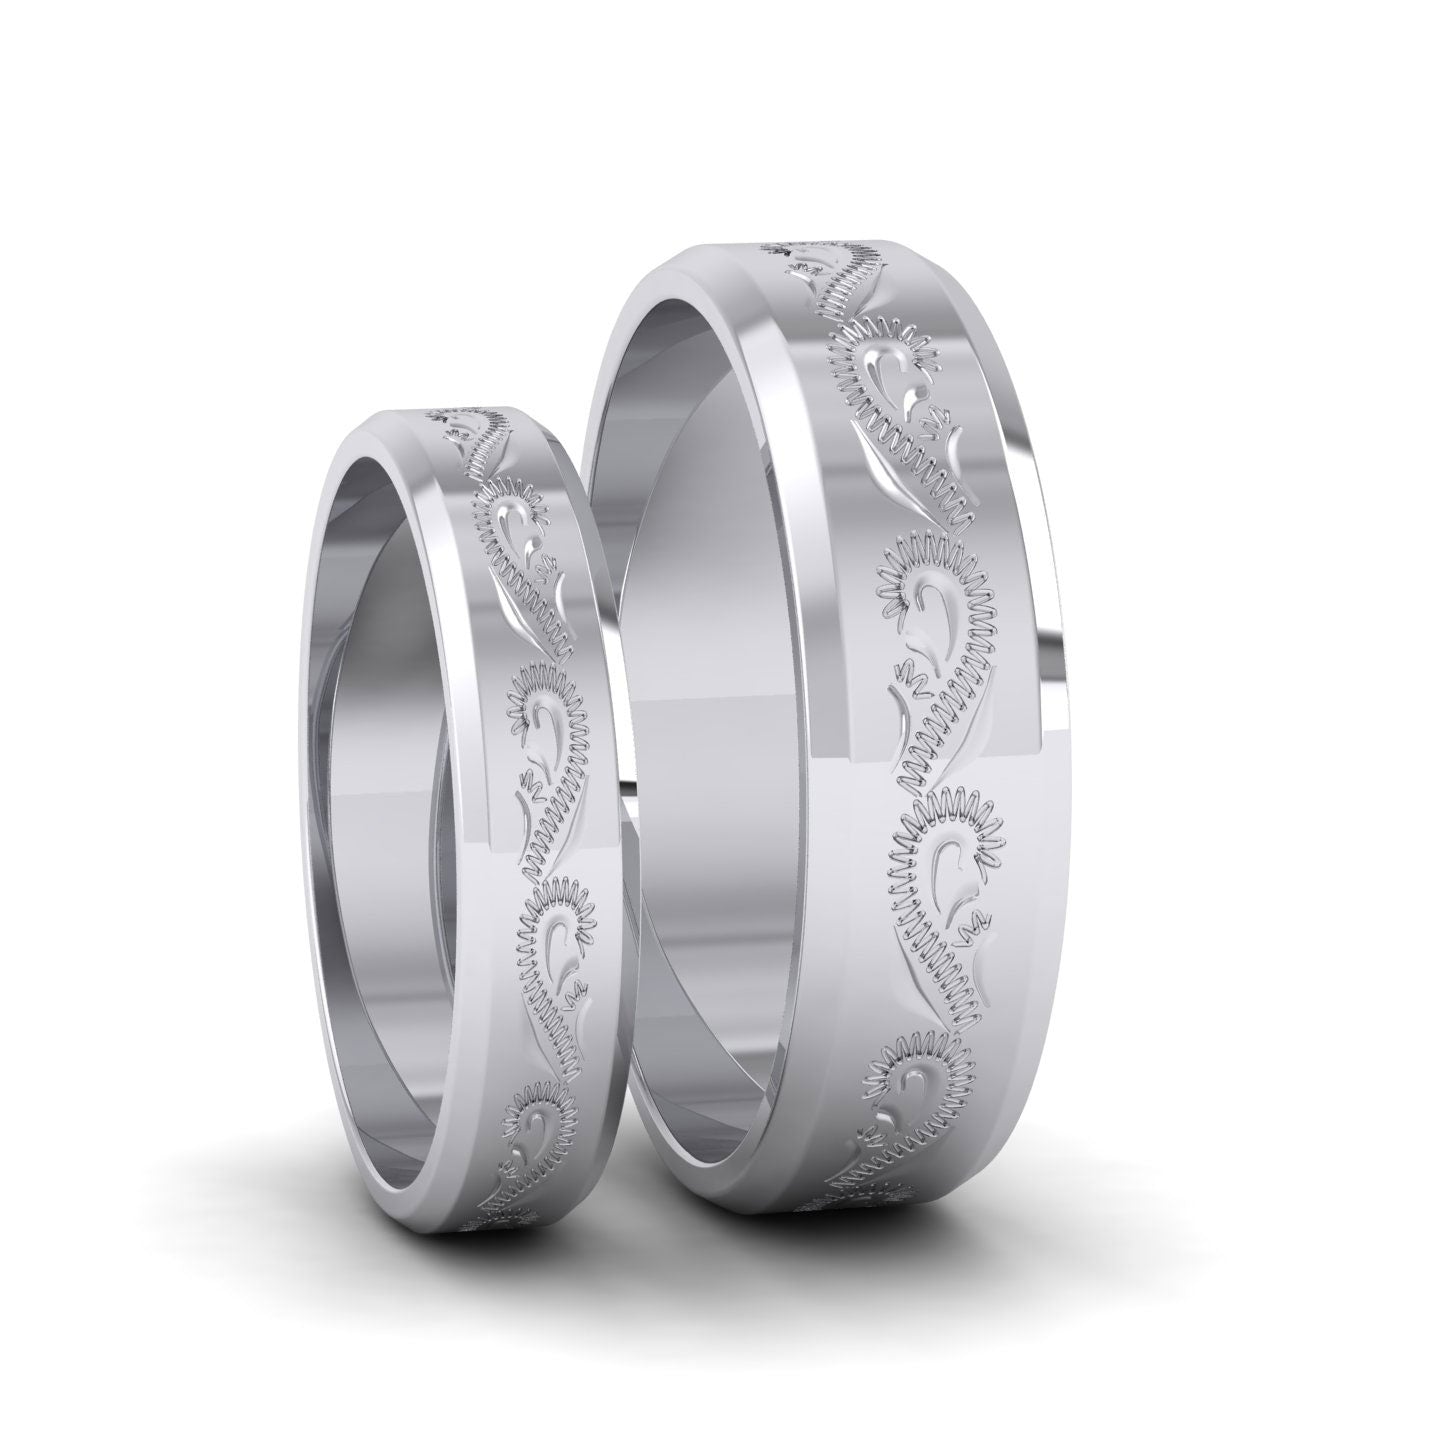 Engraved 9ct White Gold 6mm Flat Wedding Ring With Bevelled Edge